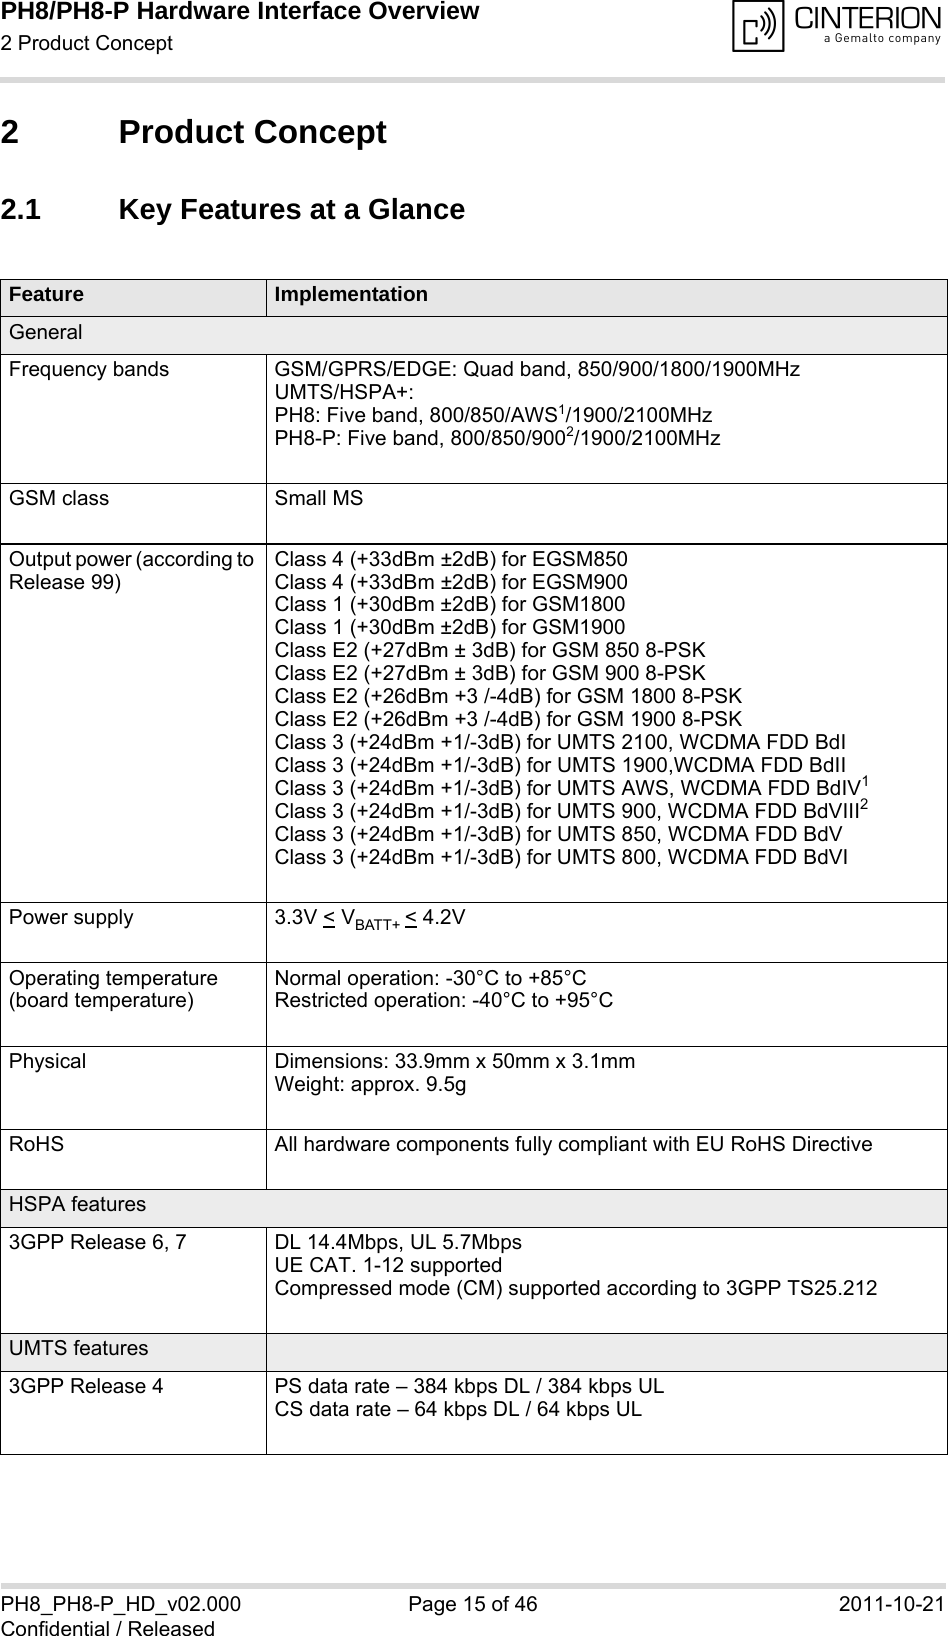 PH8/PH8-P Hardware Interface Overview2 Product Concept18PH8_PH8-P_HD_v02.000 Page 15 of 46 2011-10-21Confidential / Released2 Product Concept2.1 Key Features at a GlanceFeature ImplementationGeneralFrequency bands GSM/GPRS/EDGE: Quad band, 850/900/1800/1900MHzUMTS/HSPA+: PH8: Five band, 800/850/AWS1/1900/2100MHzPH8-P: Five band, 800/850/9002/1900/2100MHzGSM class Small MSOutput power (according to Release 99)Class 4 (+33dBm ±2dB) for EGSM850Class 4 (+33dBm ±2dB) for EGSM900Class 1 (+30dBm ±2dB) for GSM1800Class 1 (+30dBm ±2dB) for GSM1900Class E2 (+27dBm ± 3dB) for GSM 850 8-PSKClass E2 (+27dBm ± 3dB) for GSM 900 8-PSKClass E2 (+26dBm +3 /-4dB) for GSM 1800 8-PSKClass E2 (+26dBm +3 /-4dB) for GSM 1900 8-PSKClass 3 (+24dBm +1/-3dB) for UMTS 2100, WCDMA FDD BdIClass 3 (+24dBm +1/-3dB) for UMTS 1900,WCDMA FDD BdIIClass 3 (+24dBm +1/-3dB) for UMTS AWS, WCDMA FDD BdIV1Class 3 (+24dBm +1/-3dB) for UMTS 900, WCDMA FDD BdVIII2Class 3 (+24dBm +1/-3dB) for UMTS 850, WCDMA FDD BdVClass 3 (+24dBm +1/-3dB) for UMTS 800, WCDMA FDD BdVIPower supply 3.3V &lt; VBATT+ &lt; 4.2VOperating temperature (board temperature)Normal operation: -30°C to +85°CRestricted operation: -40°C to +95°CPhysical Dimensions: 33.9mm x 50mm x 3.1mmWeight: approx. 9.5gRoHS All hardware components fully compliant with EU RoHS DirectiveHSPA features3GPP Release 6, 7 DL 14.4Mbps, UL 5.7MbpsUE CAT. 1-12 supportedCompressed mode (CM) supported according to 3GPP TS25.212UMTS features3GPP Release 4 PS data rate – 384 kbps DL / 384 kbps ULCS data rate – 64 kbps DL / 64 kbps UL